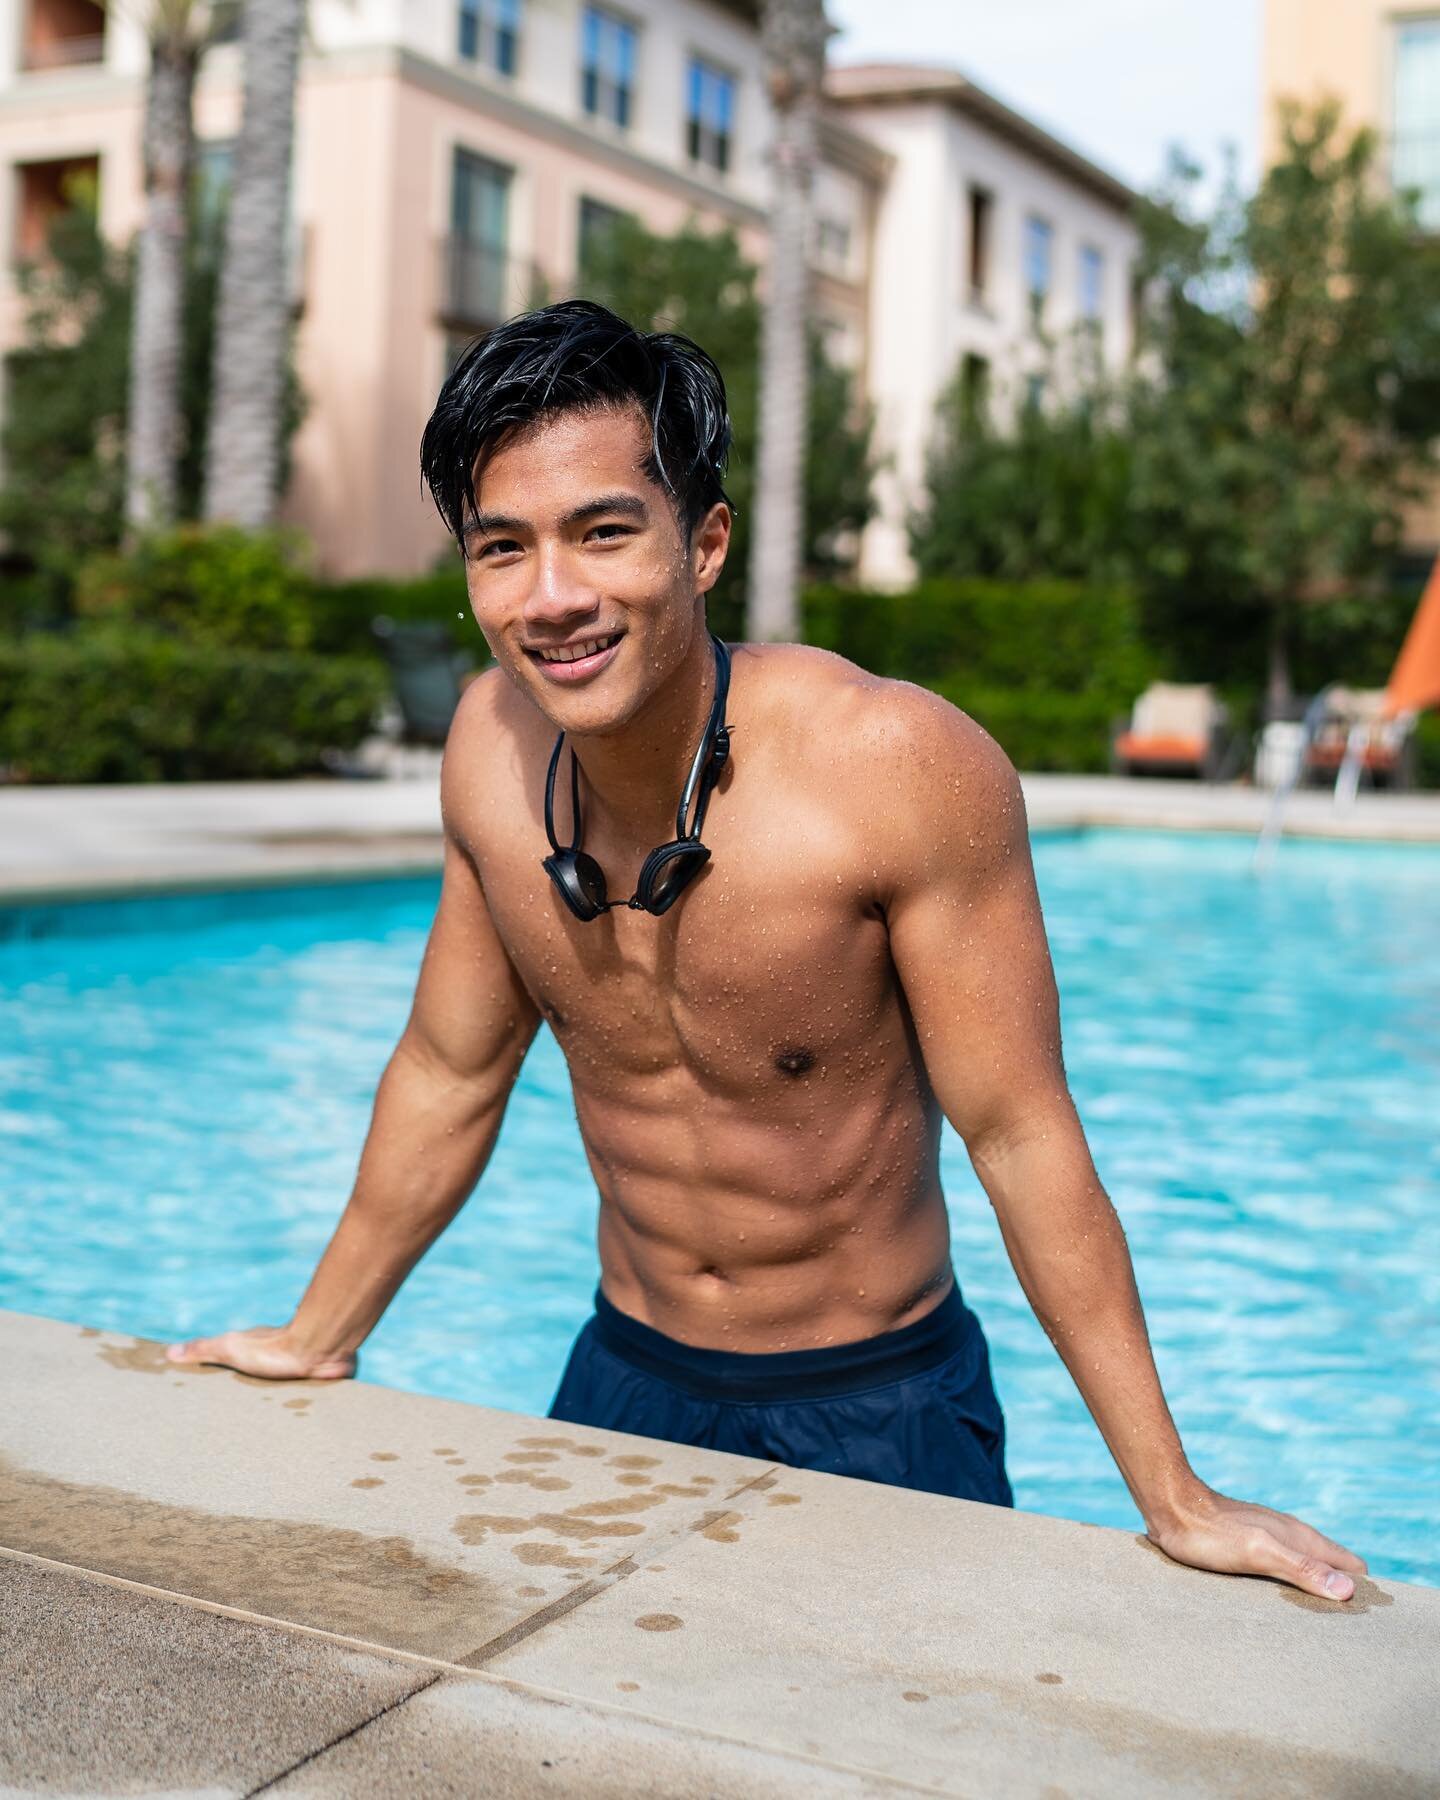 Midway through March - it looks like gyms are opening up again! Curious: are you already working out at a gym or are you working out from home?!
&bull;
&bull;
&bull;
&bull;
&bull;
#poolside #pooltime #swimmingpool #abs #hiit #hiitworkout #strong #mus